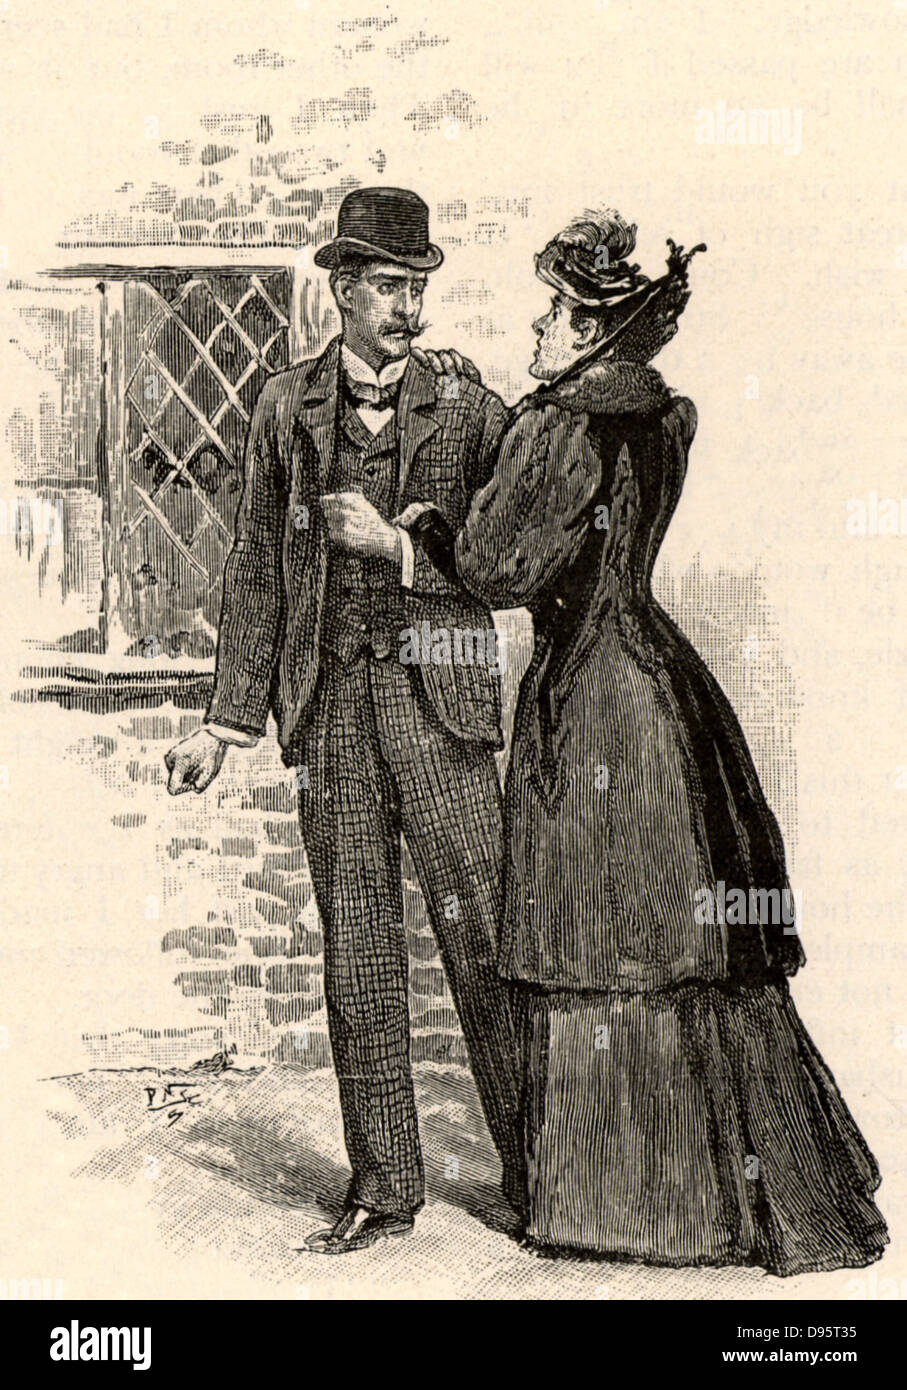 The Adventure of the Yellow Face'. Effie Grant Munro pleading with her husband, Jack, to trust her in spite of her suspicious behaviour. From 'The Adventures of Sherlock Holmes' by Conan Doyle from 'The Strand Magazine' (London, 1893). Illustration by Sidney E Paget, the first artist to draw Sherlock Holmes.  Engraving. Stock Photo